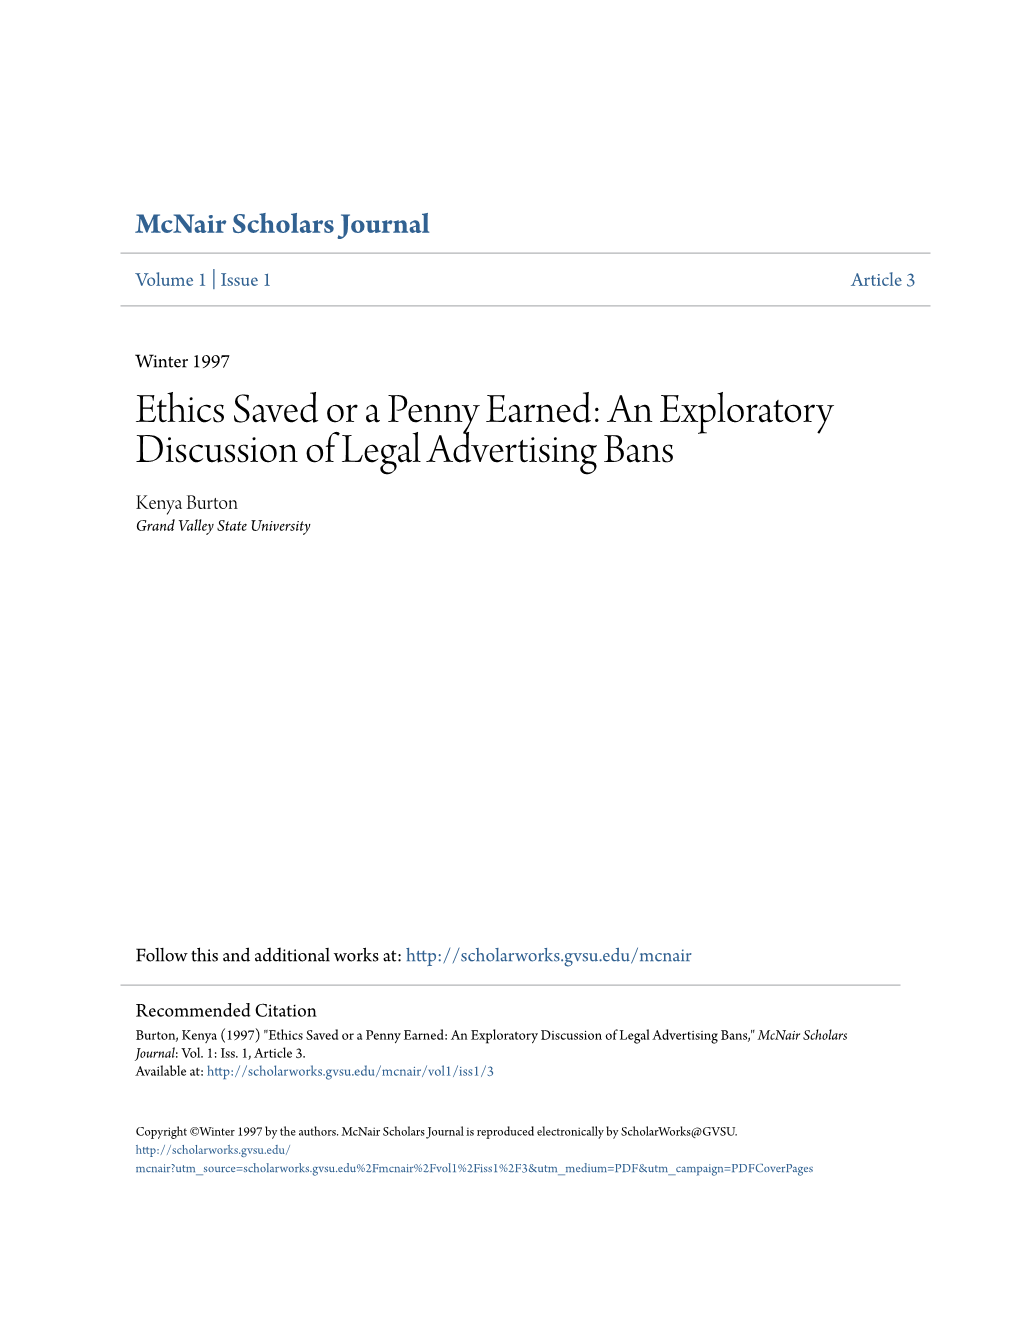 An Exploratory Discussion of Legal Advertising Bans Kenya Burton Grand Valley State University